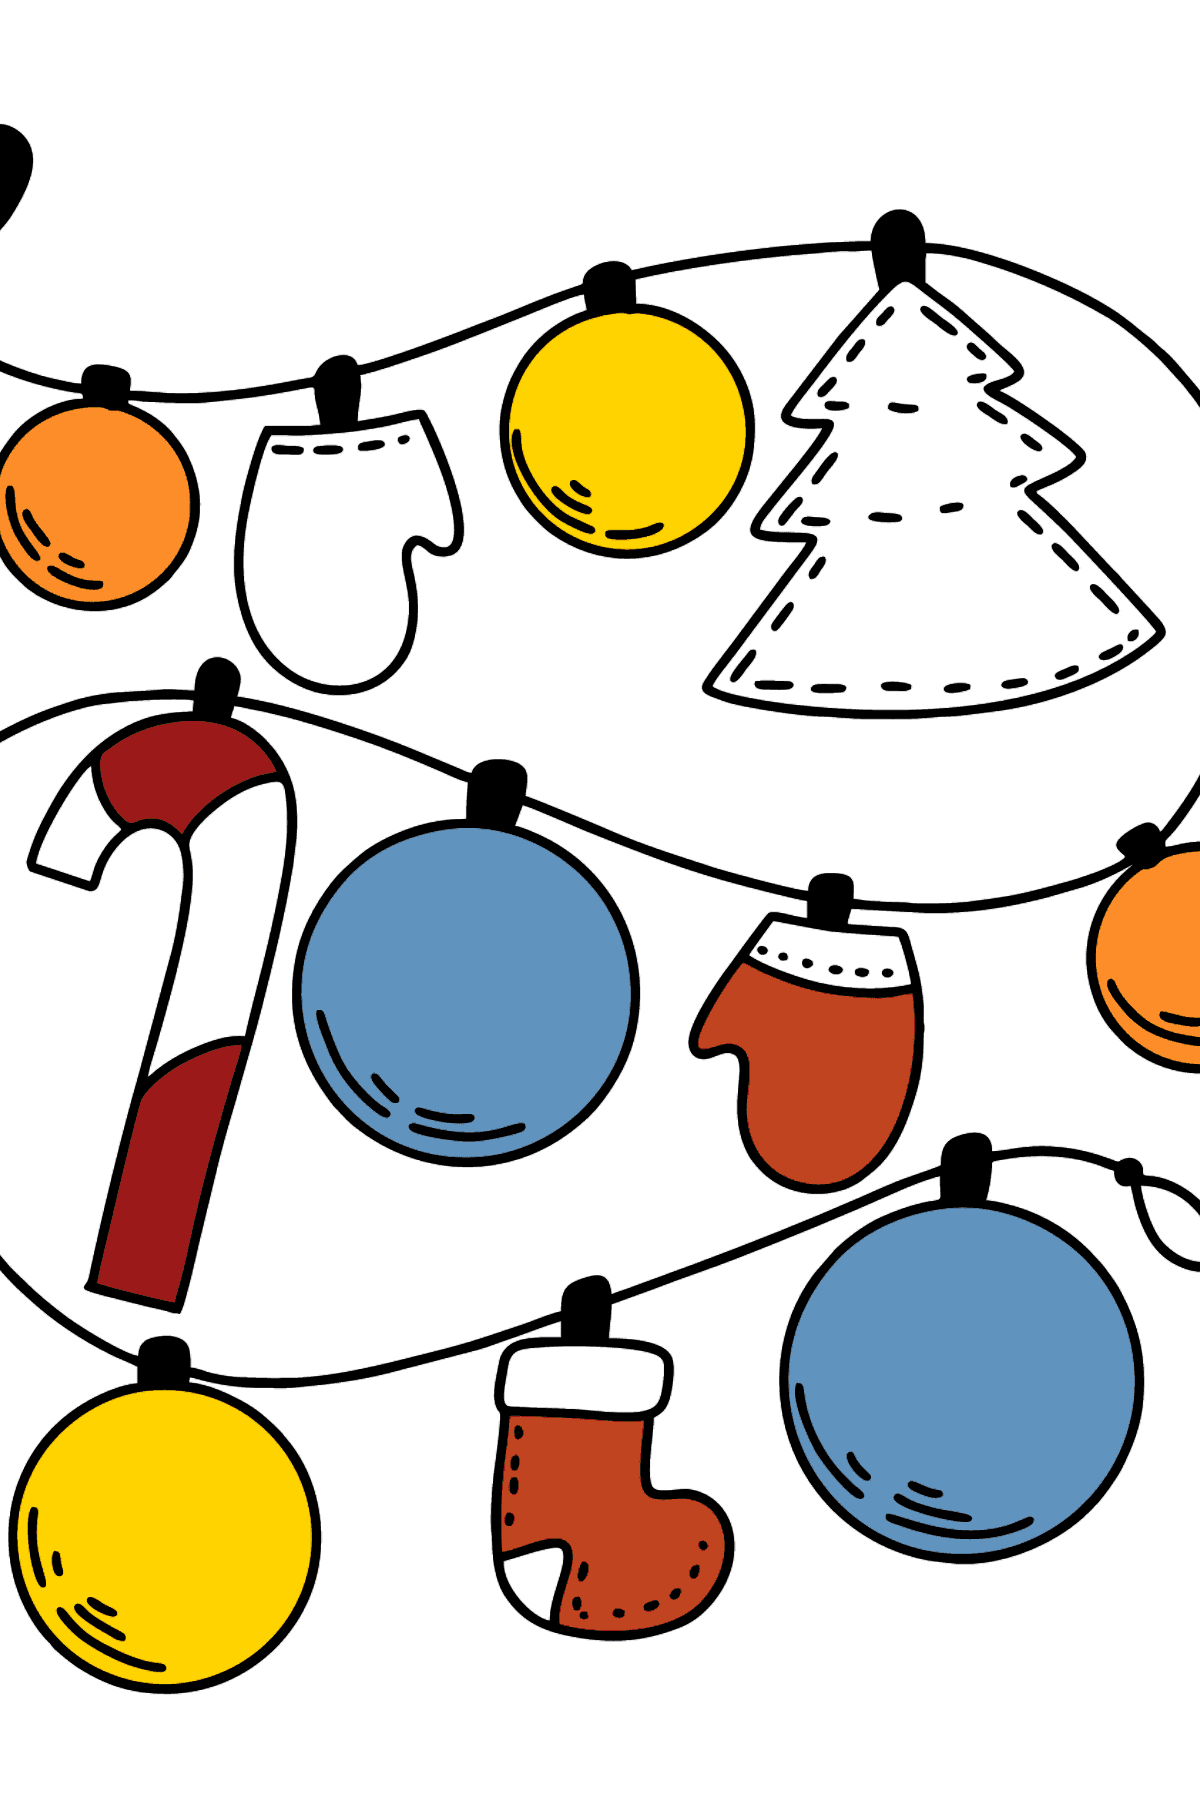 Christmas garland coloring page - Coloring Pages for Kids